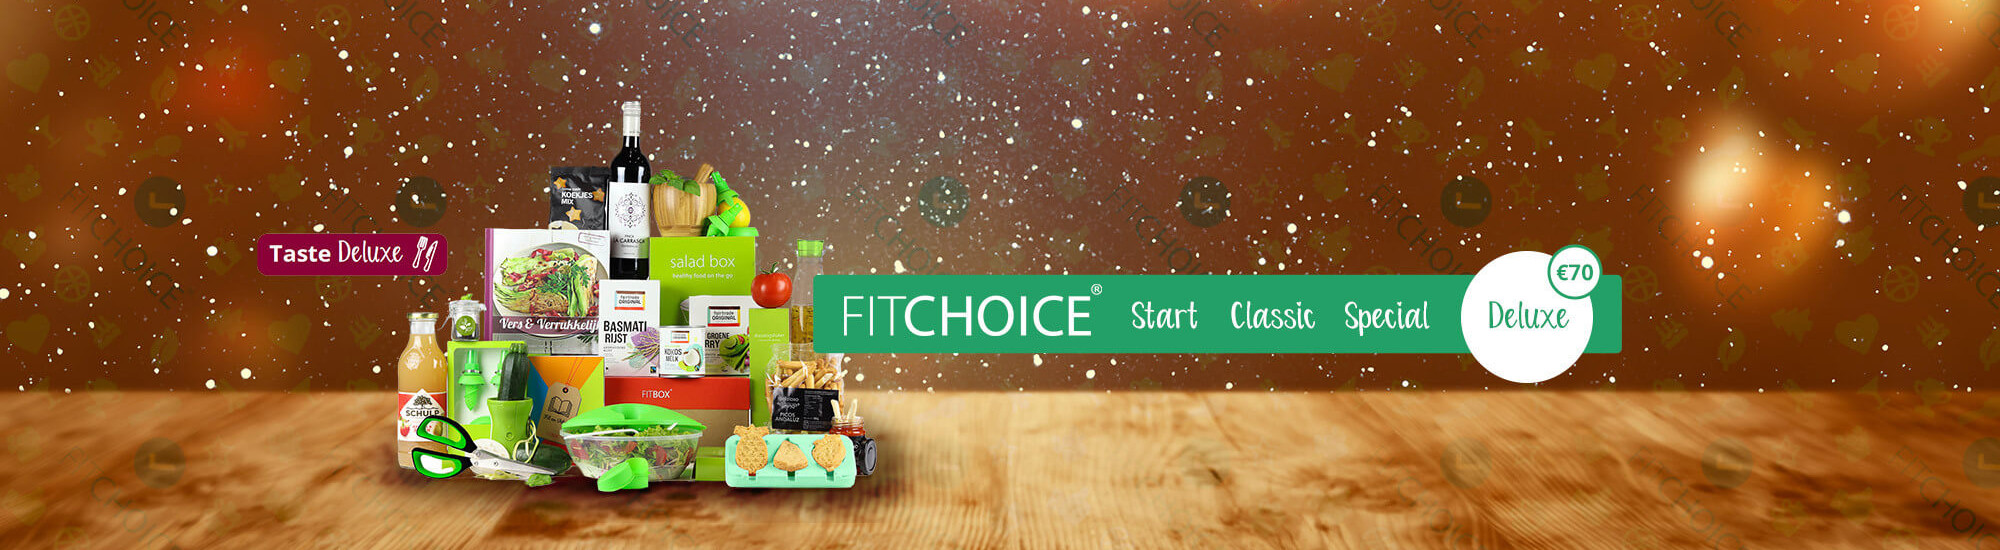 Banner-fitchoice-taste-deluxe-70-new